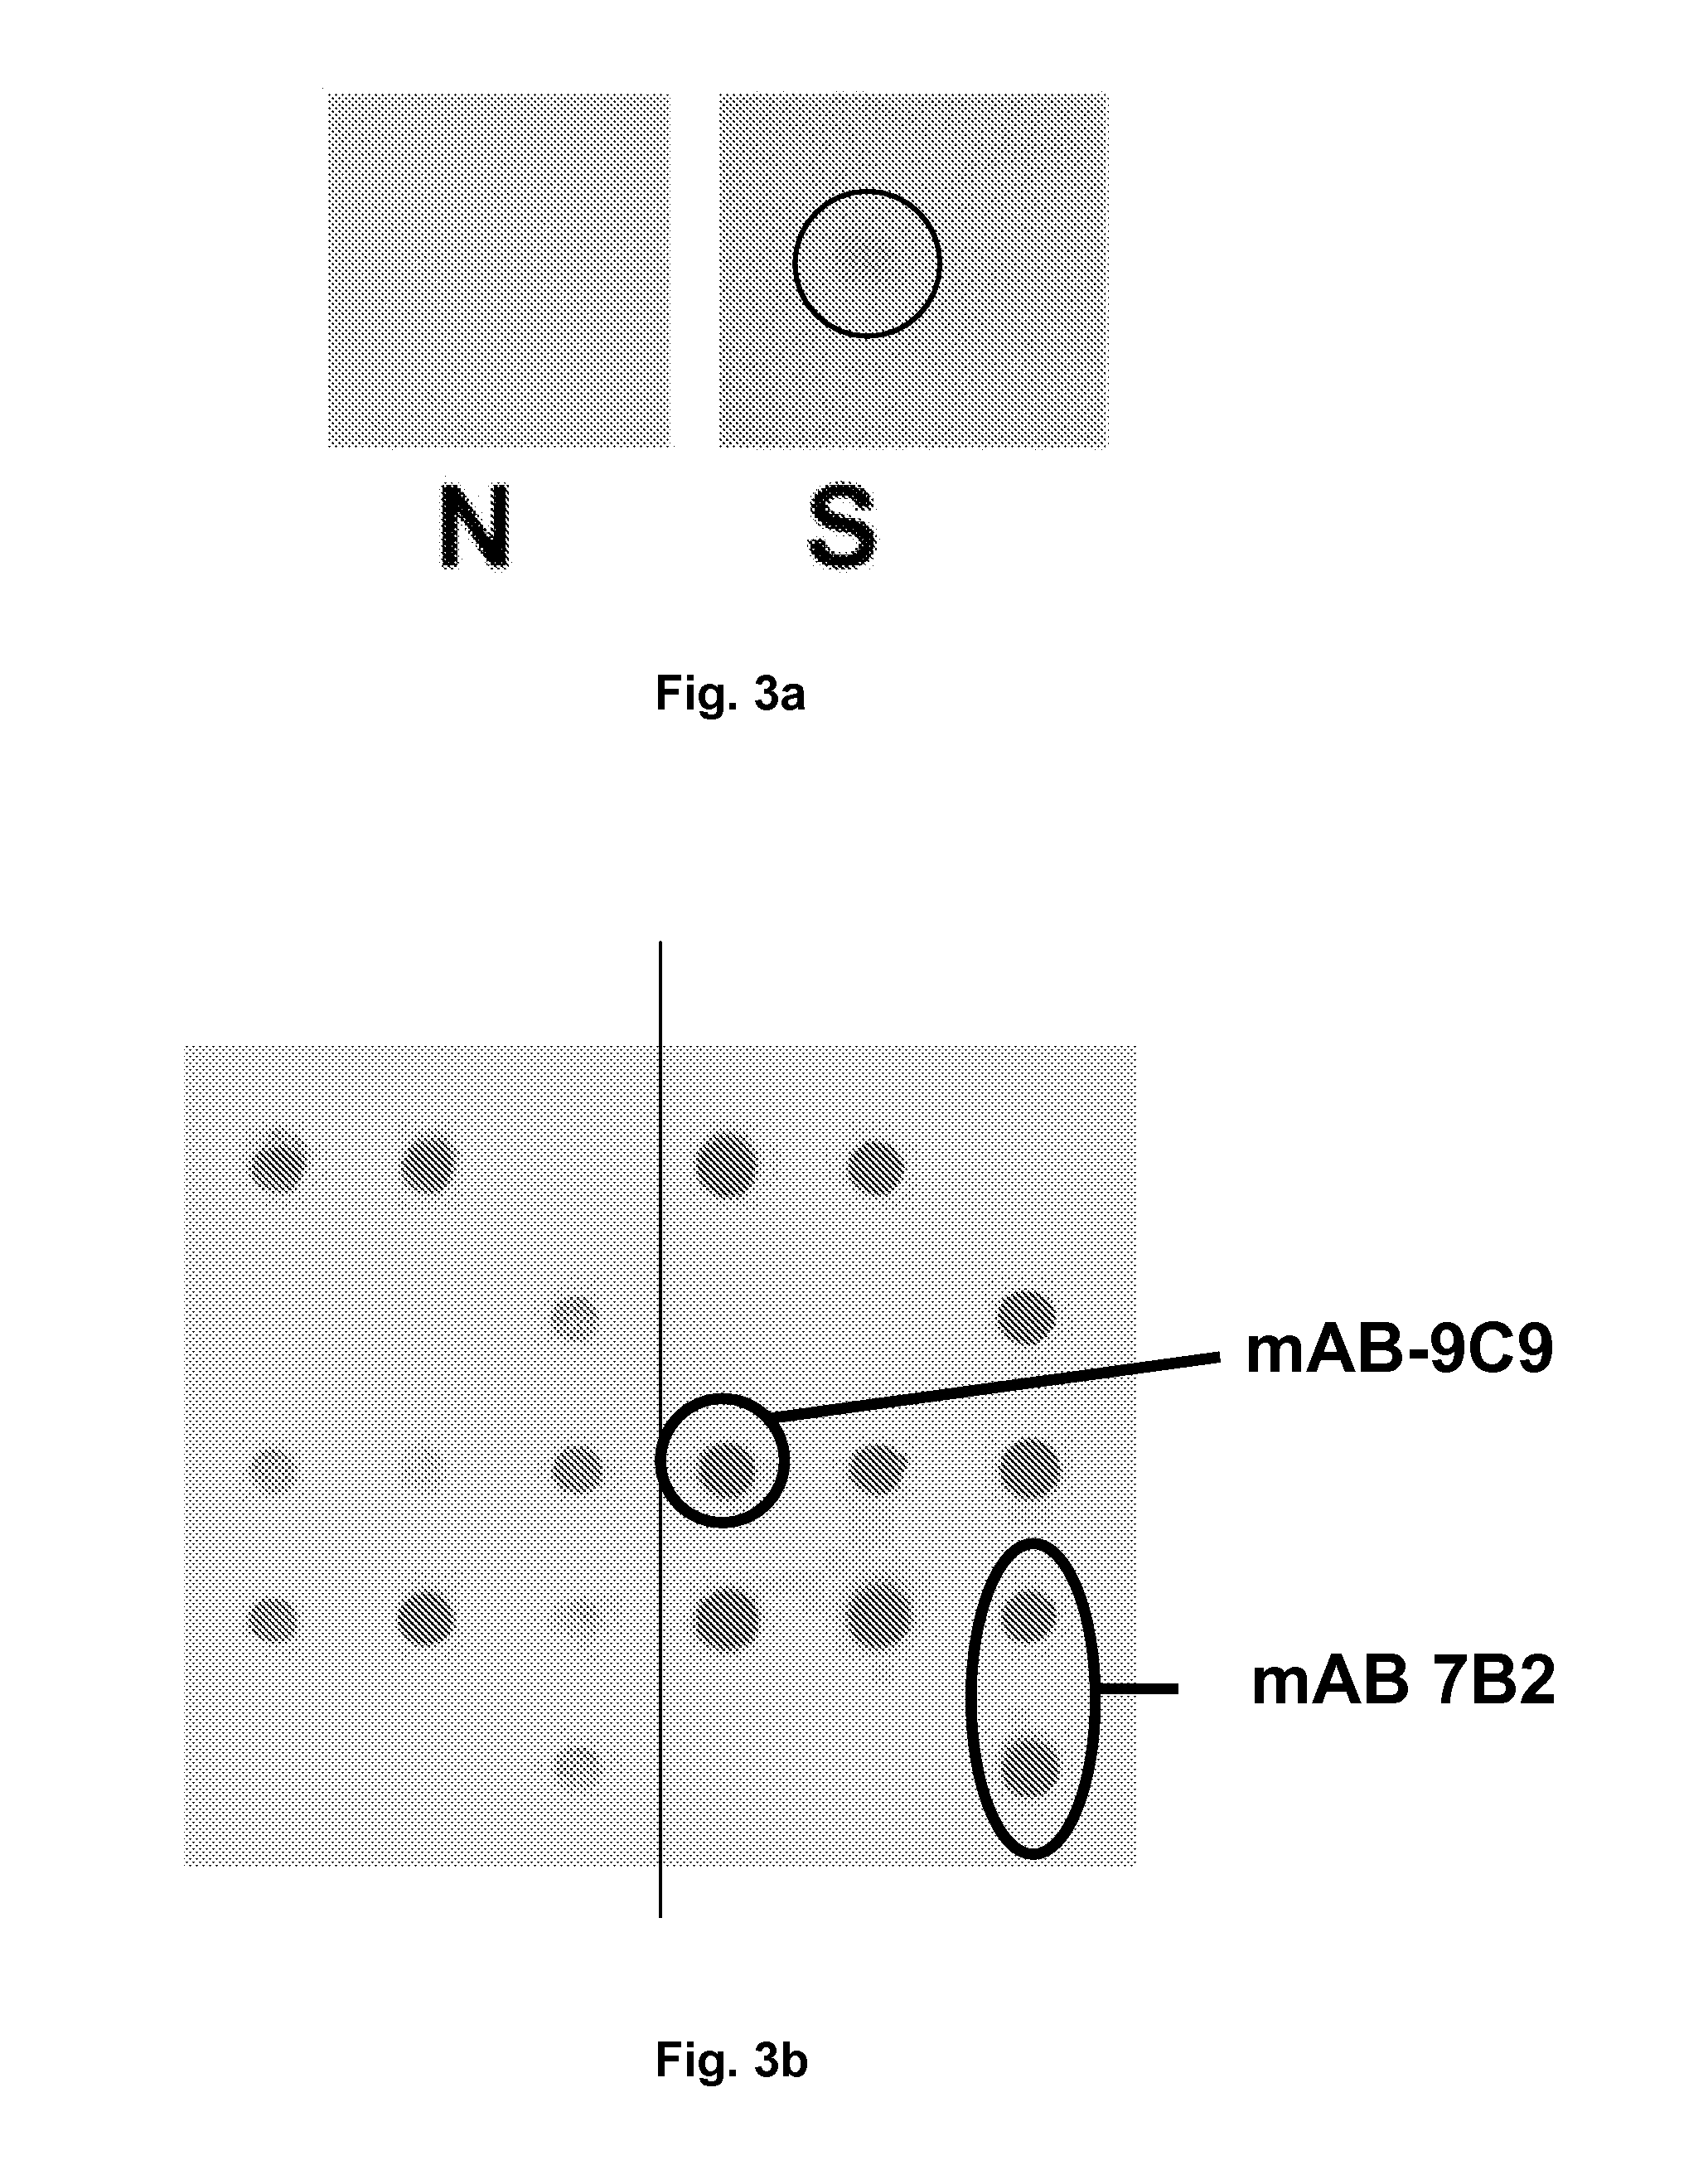 Antibody for Diagnosing and Treating Neuropsychiatric Diseases, in Particular Schizophrenia, Depression and Bipolar Affective Disorders